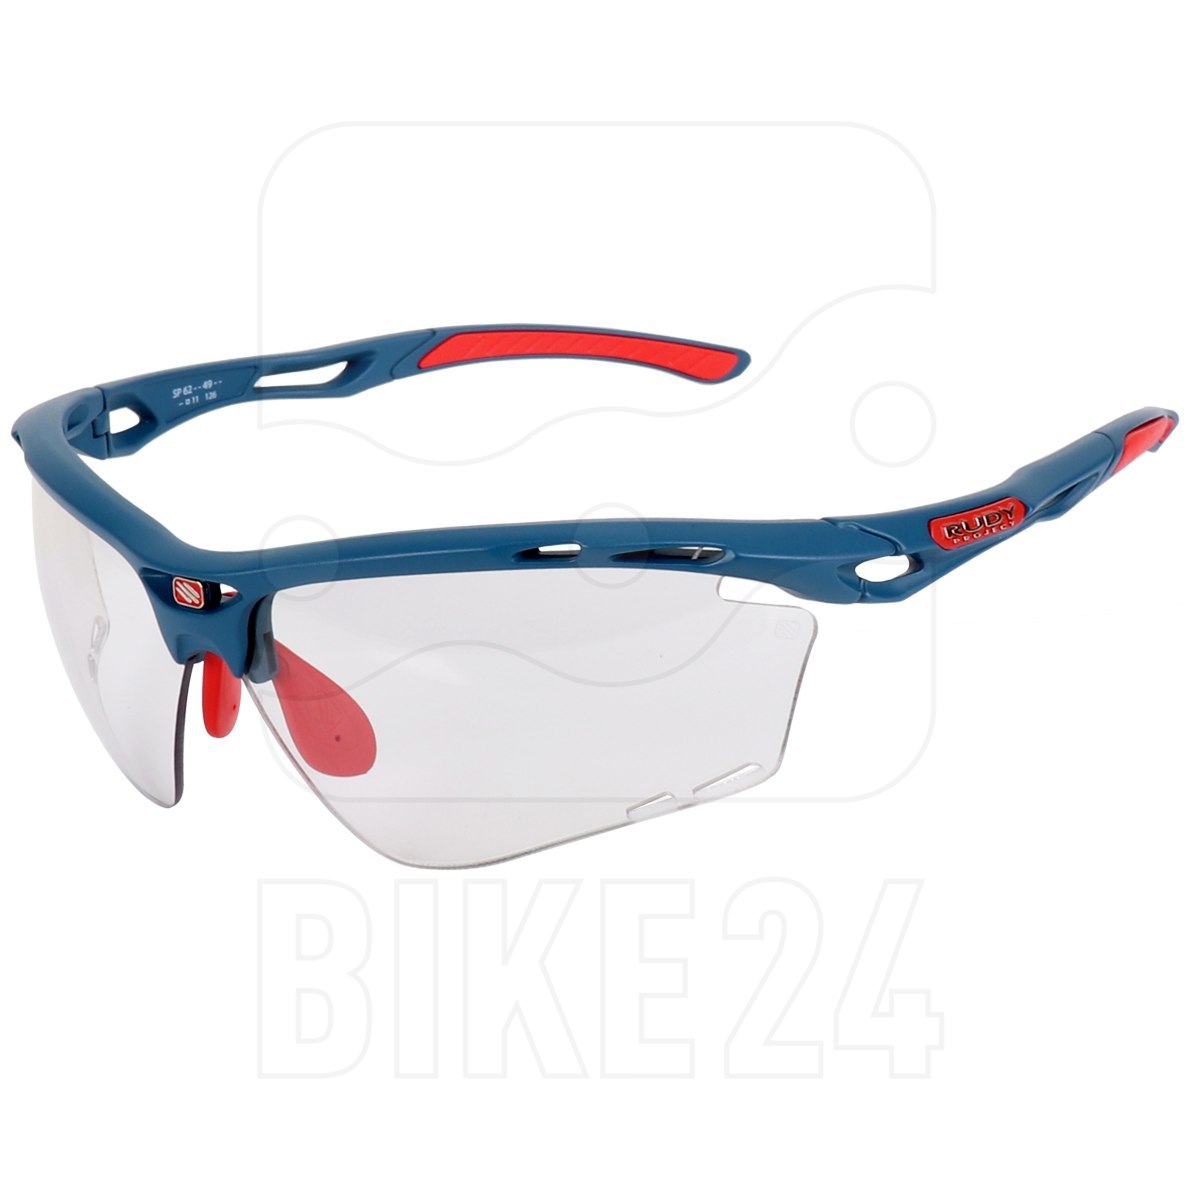 Picture of Rudy Project Propulse Glasses - Photochromic - Pacific Blue Matte/ImpactX 2Red